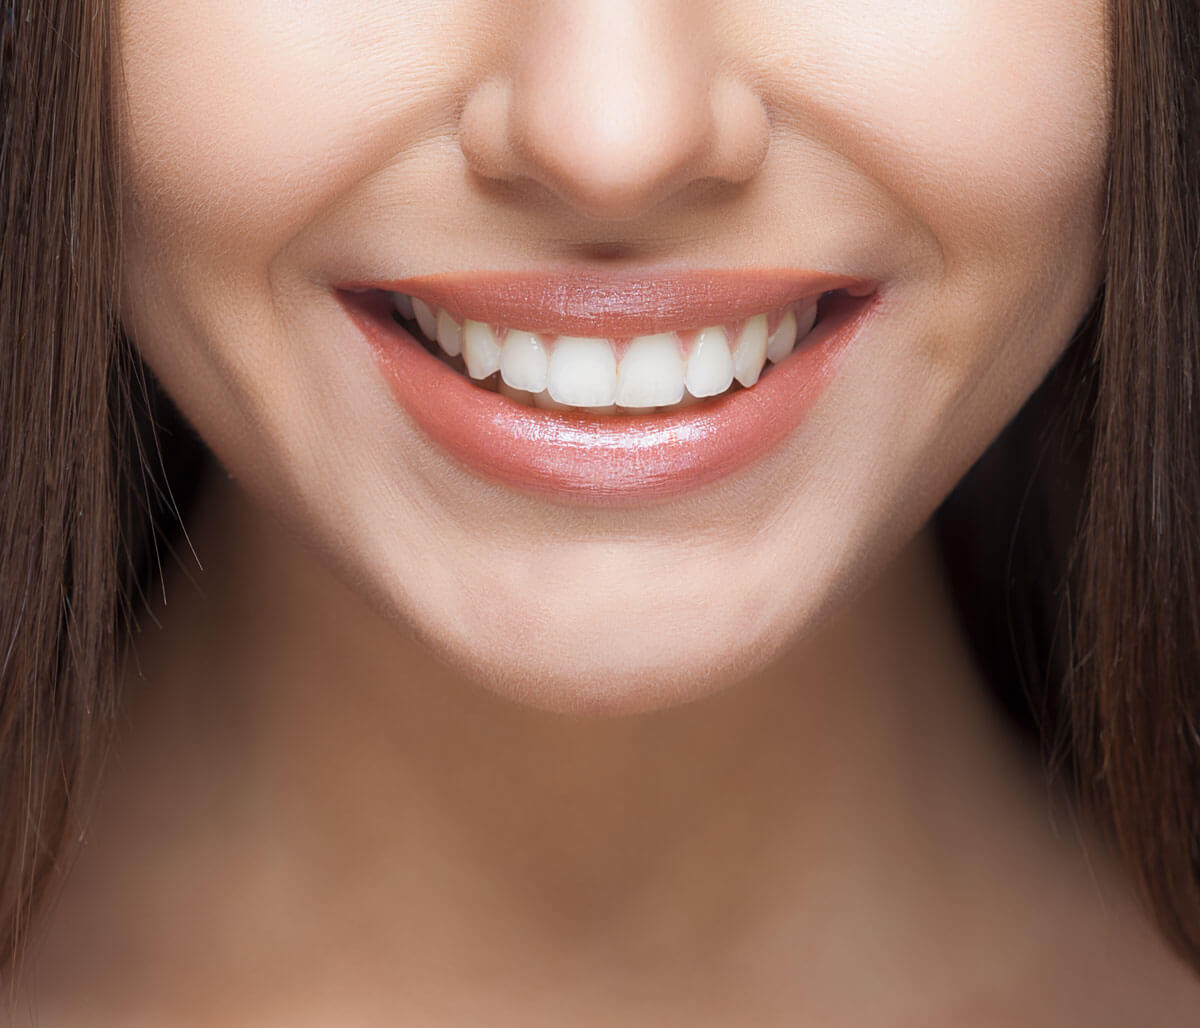 Teeth whitening from your dentist near Normal, IL does more than brighten your smile